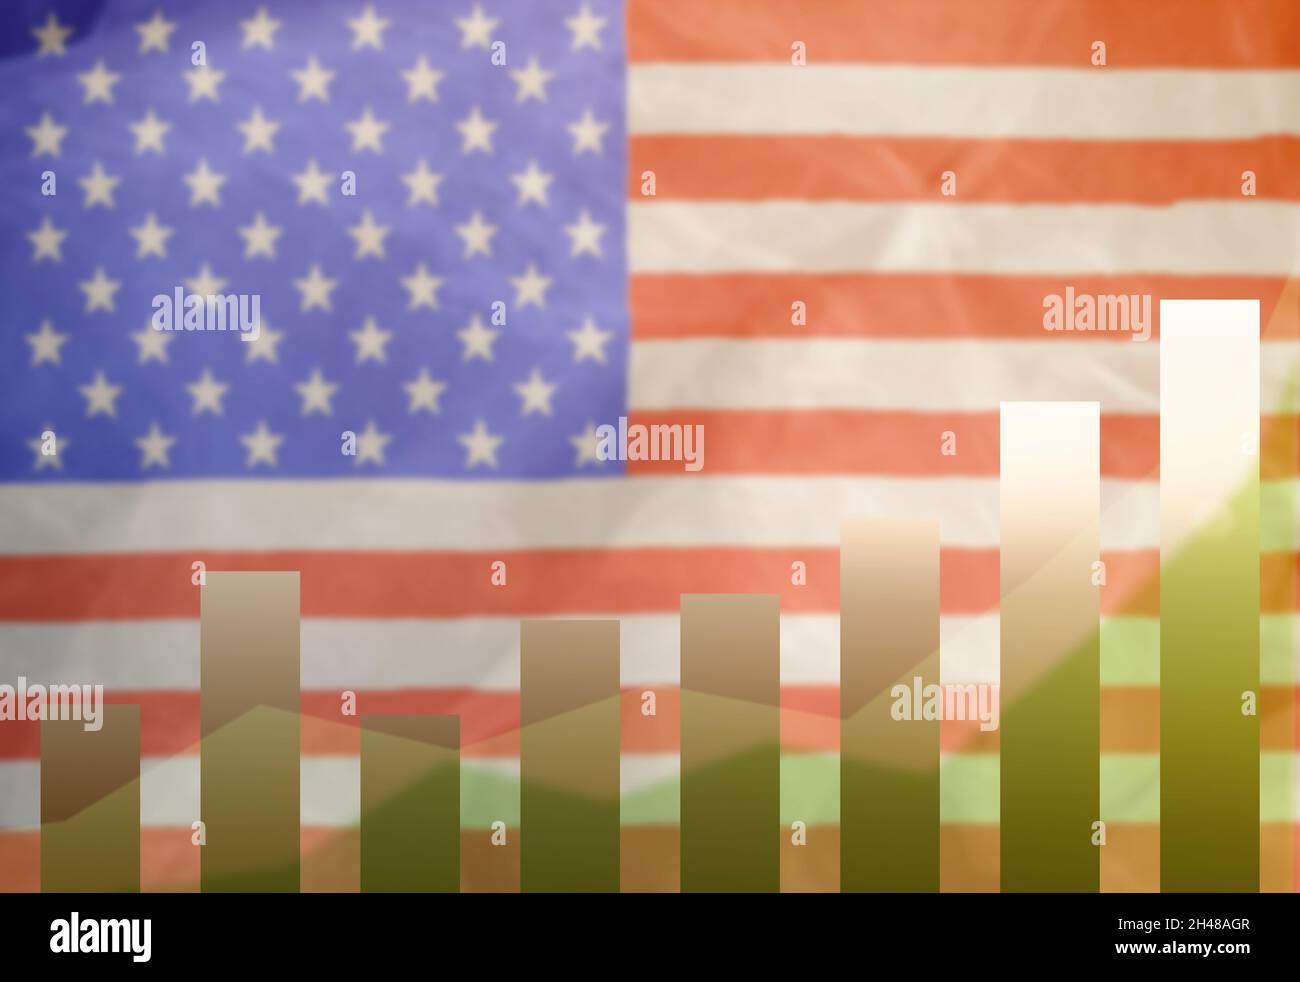 The concept of Growth success developments against the background of the national flag of the USA. Mockup chart increase of positive indicators. Stock Photo